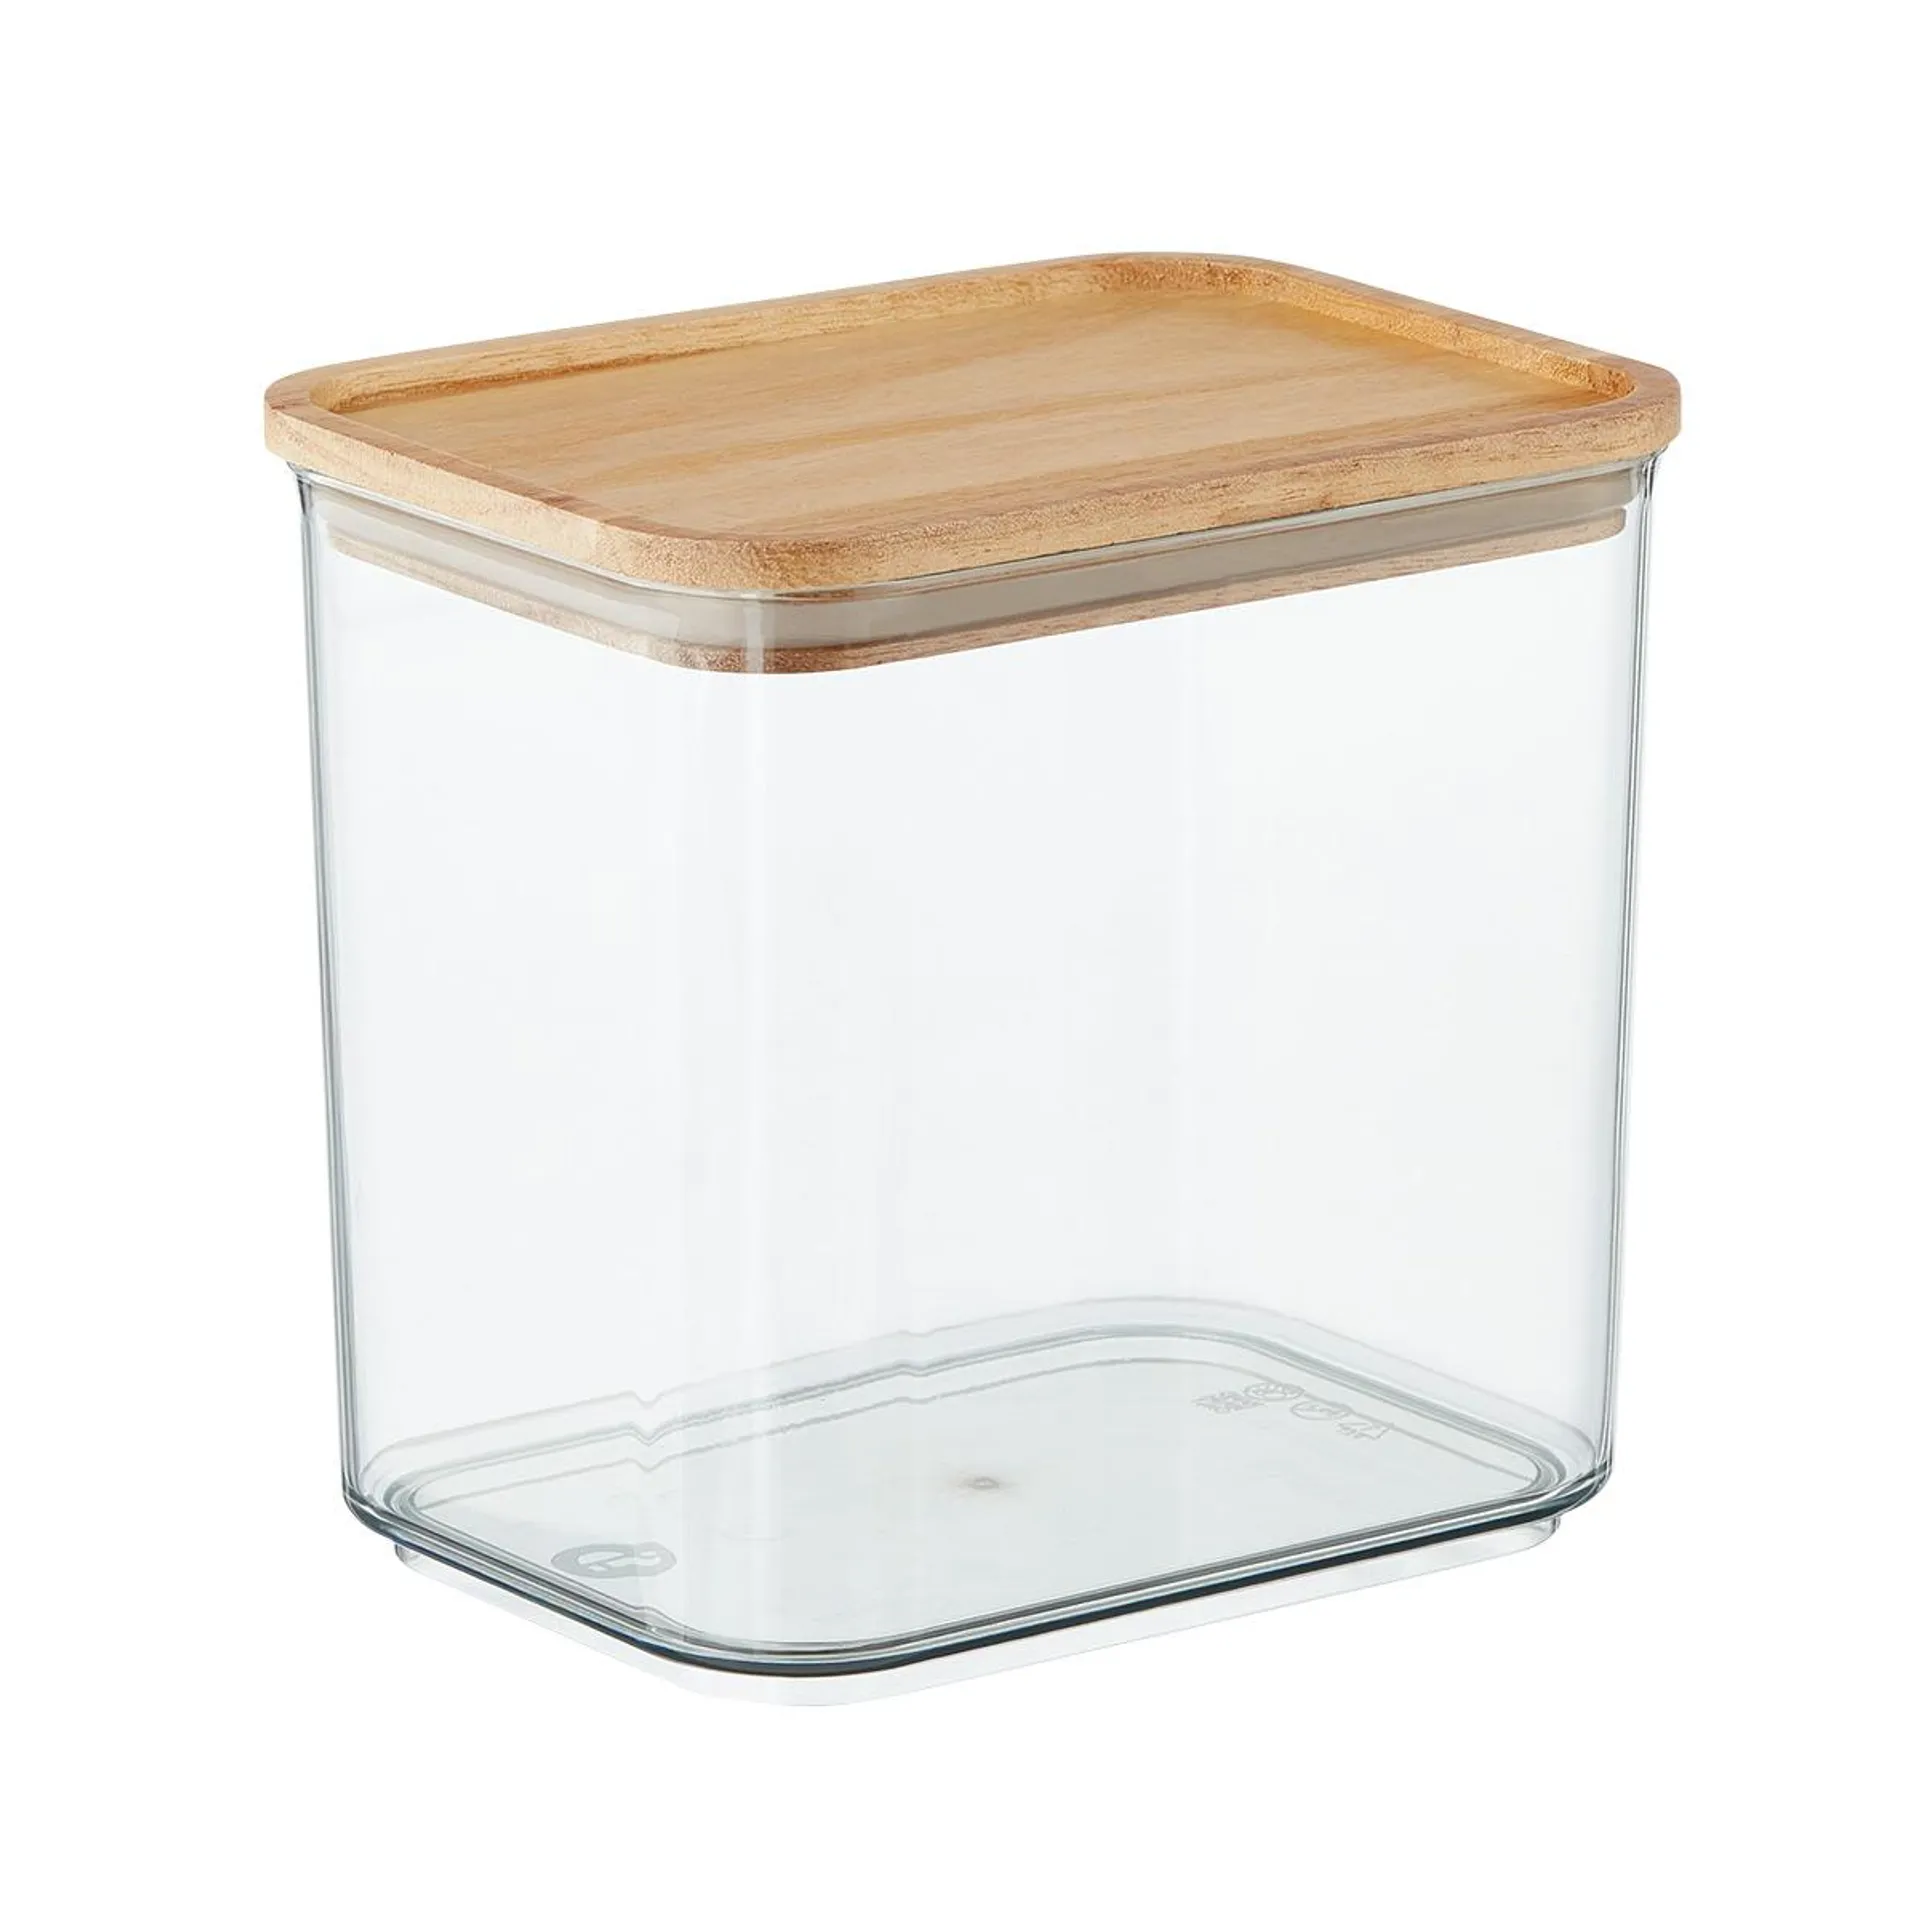 Rosanna Pansino x iD 8.4 c. Canister w/ Wood Lid Clear